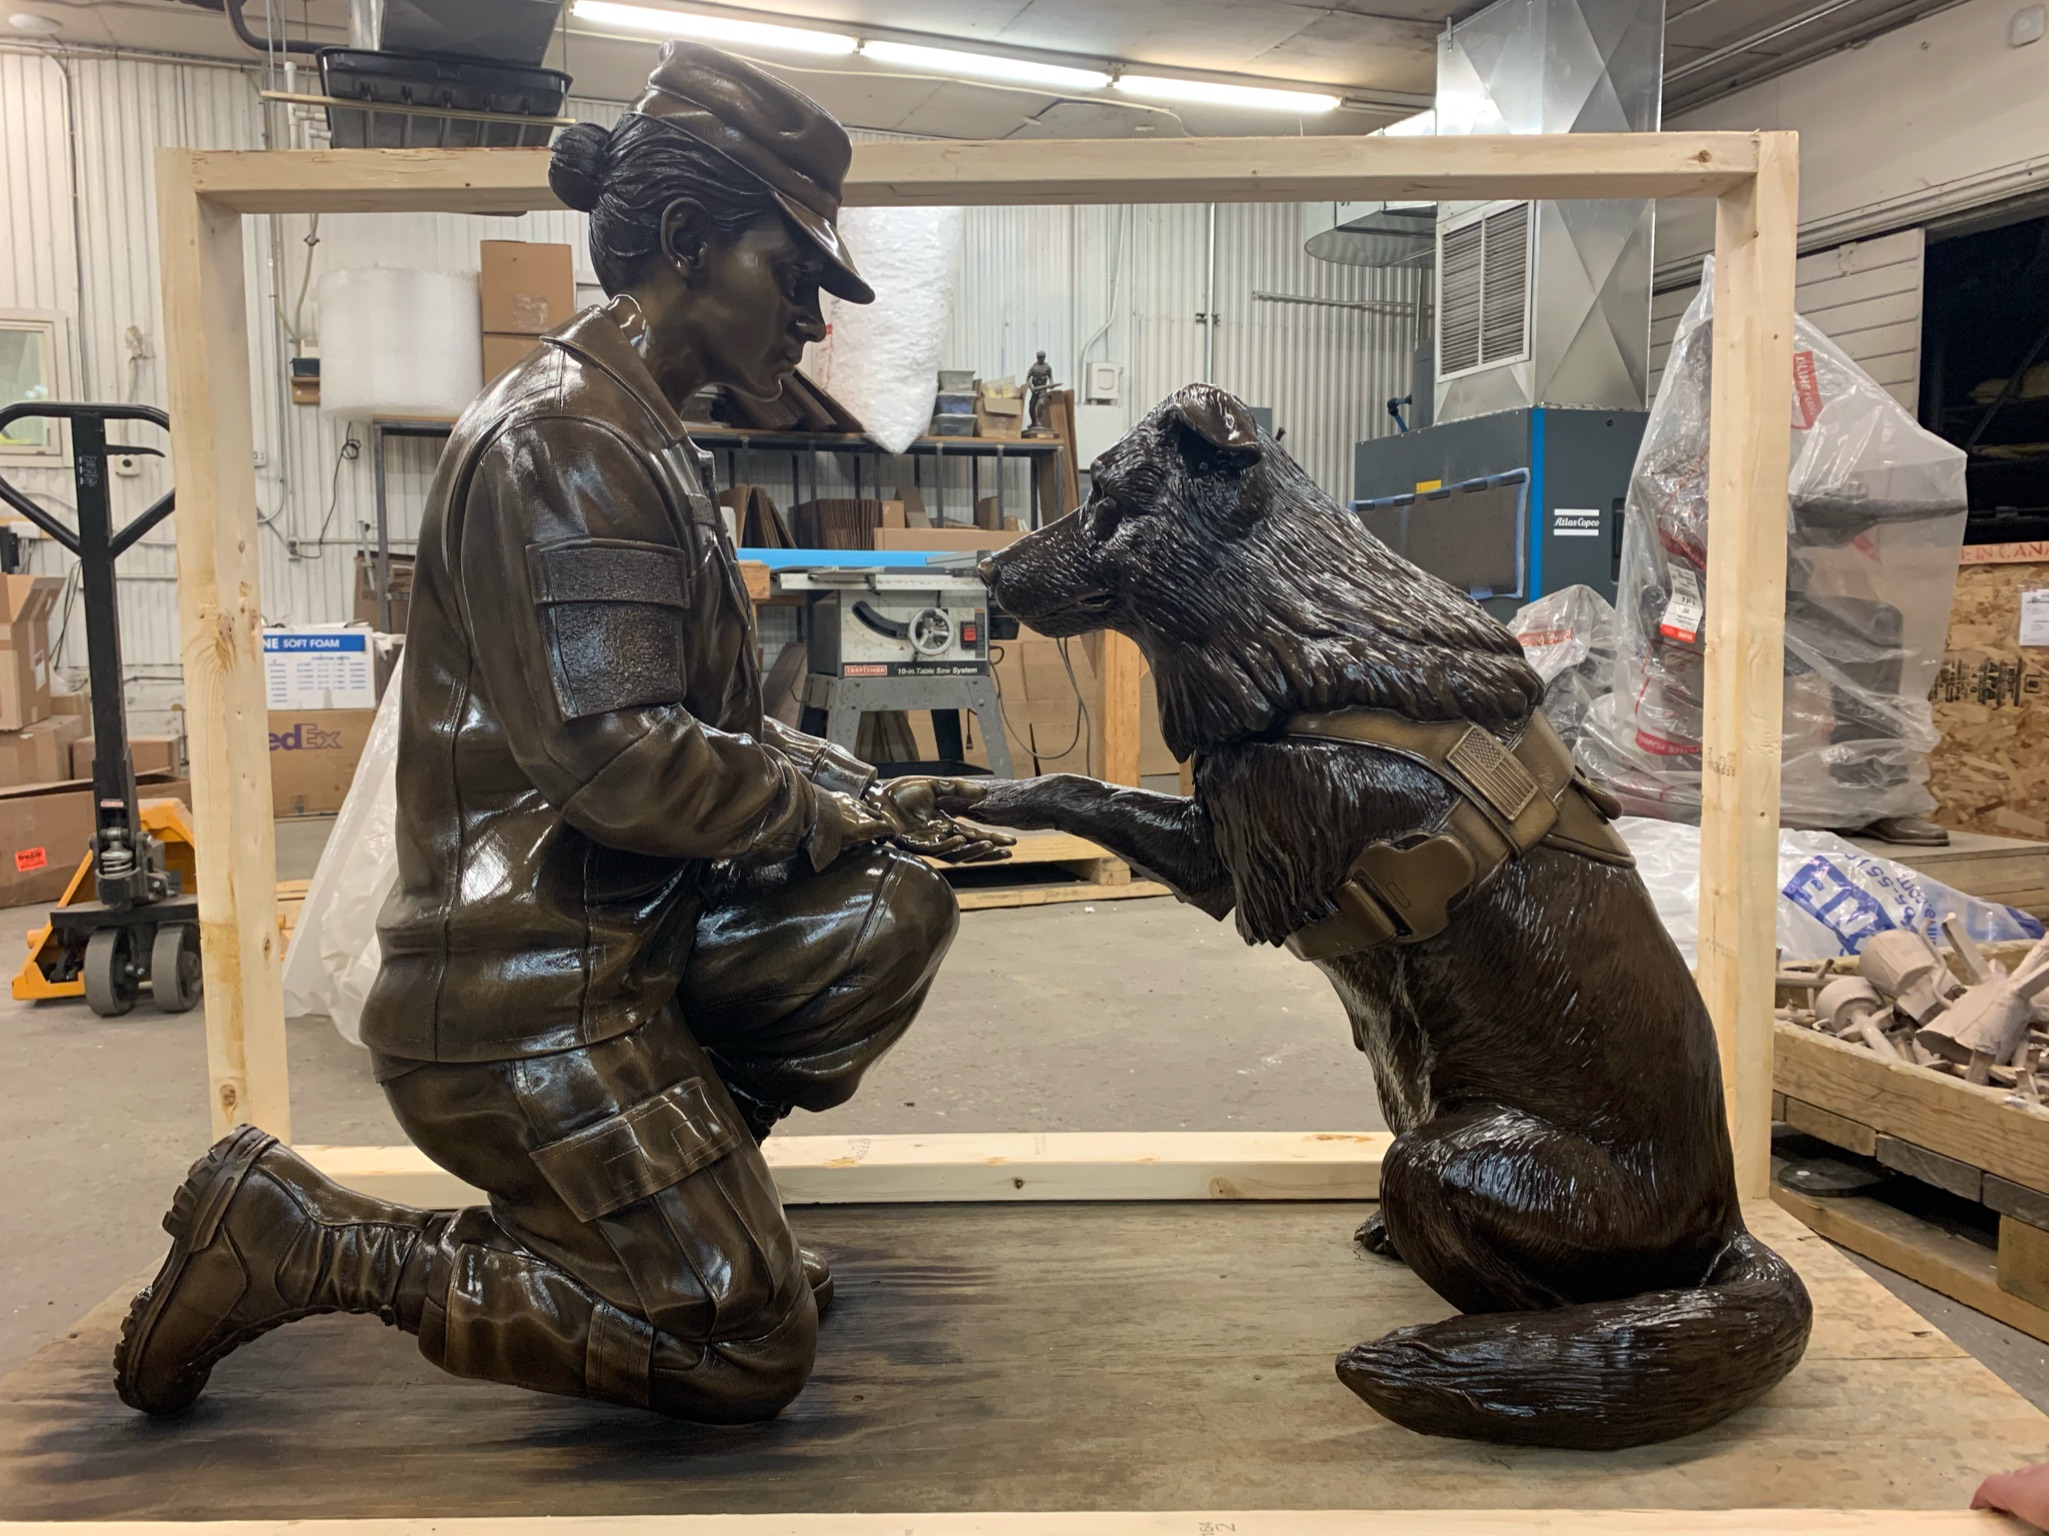 Bronze military memorial female soldier statue shaking paw of canine